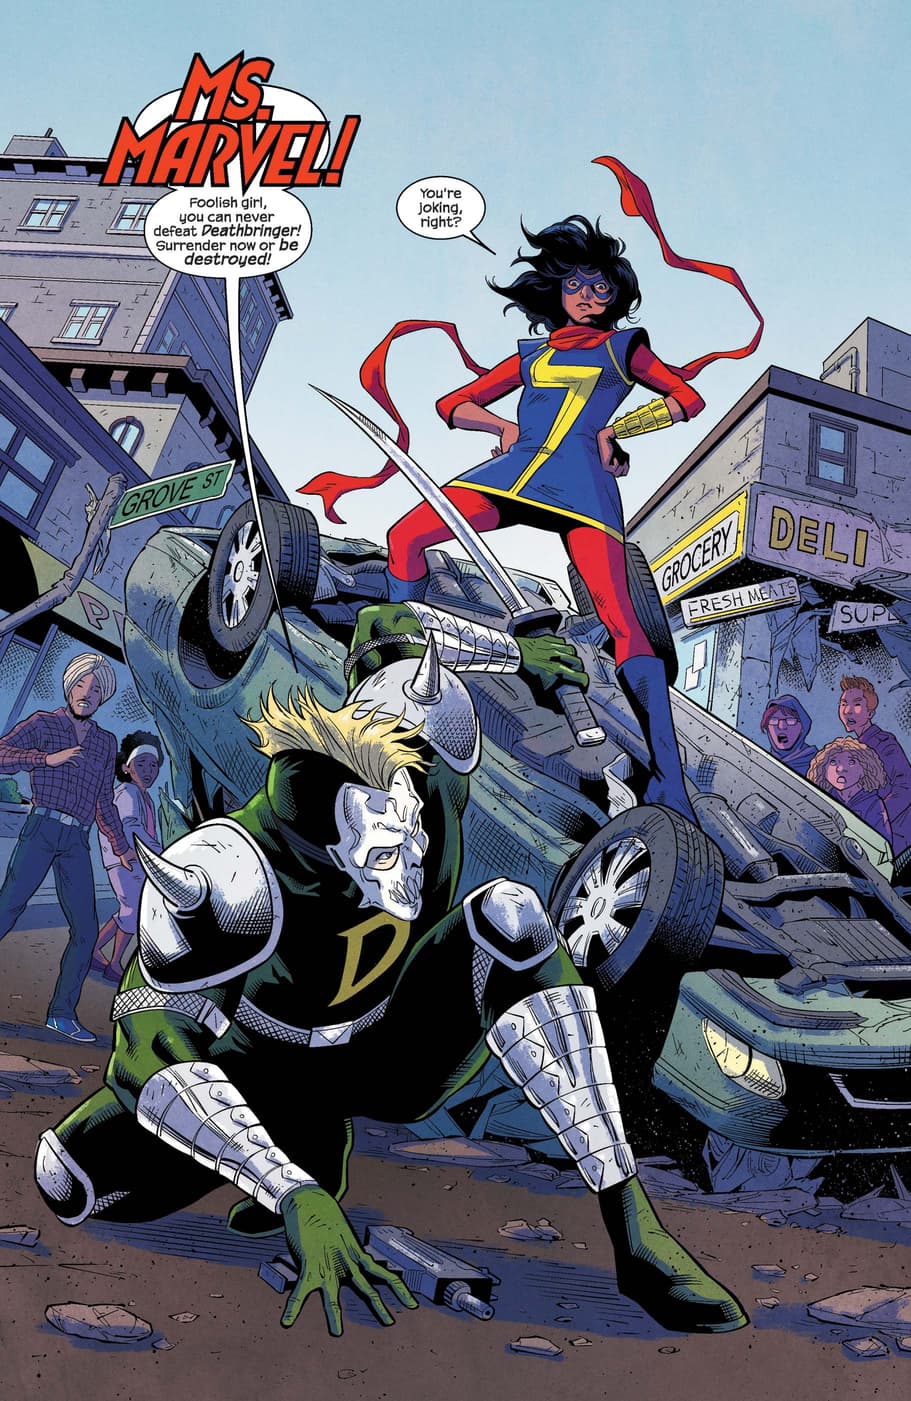 Taking on the baddies in MAGNIFICENT MS. MARVEL (2019) #1.